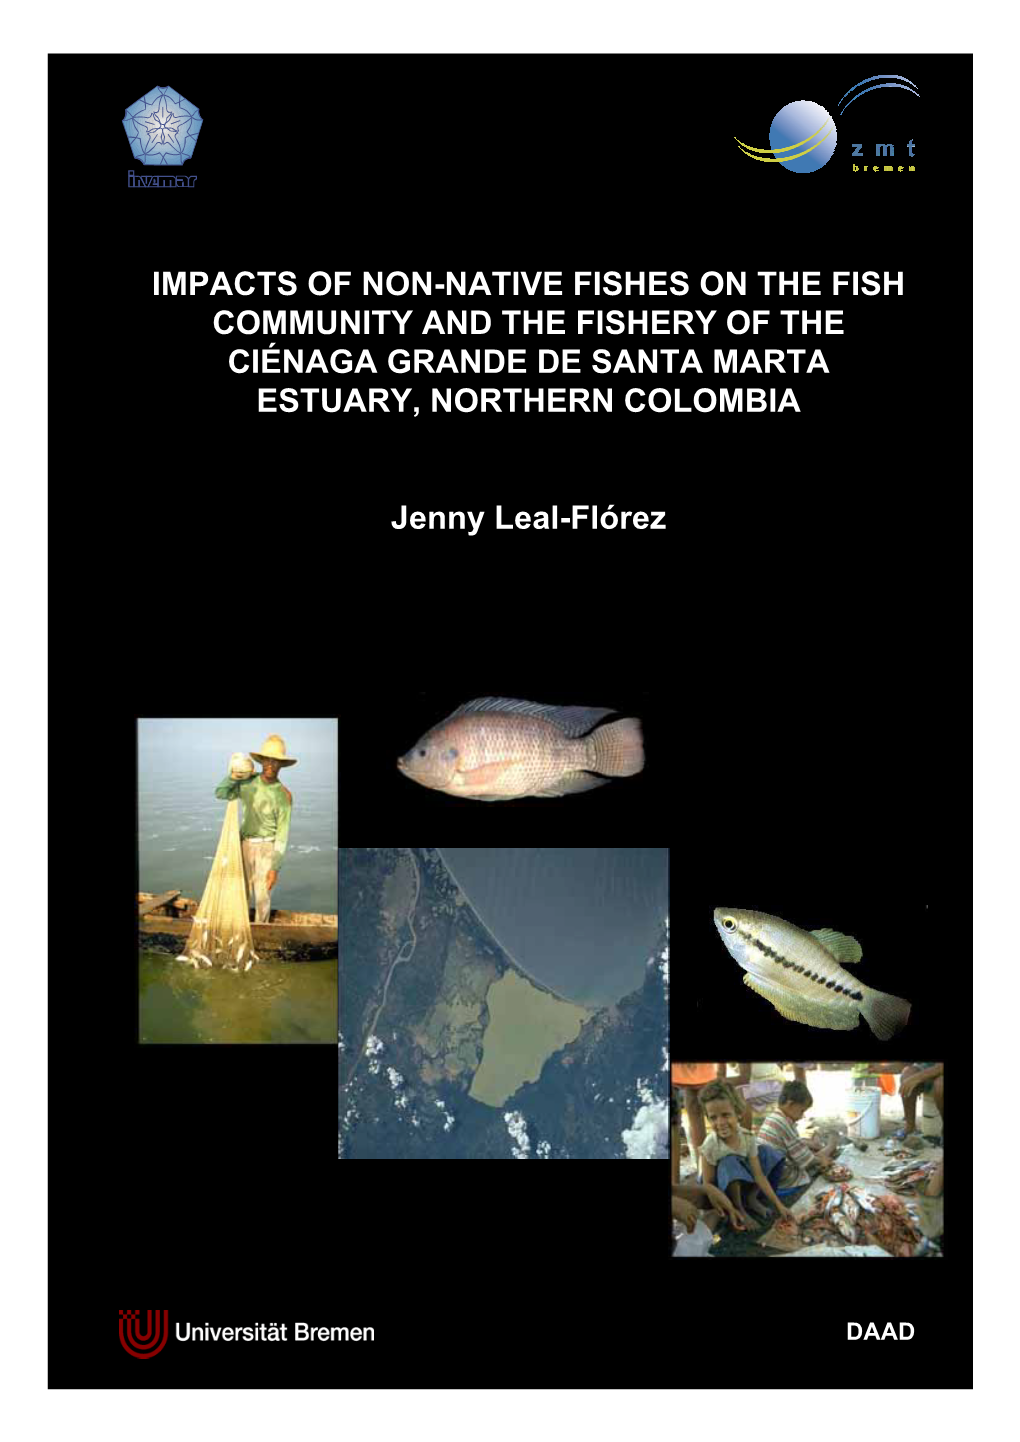 Impacts of Non-Native Fishes on the Fish Community and the Fishery of the Ciénaga Grande De Santa Marta Estuary, Northern Colombia